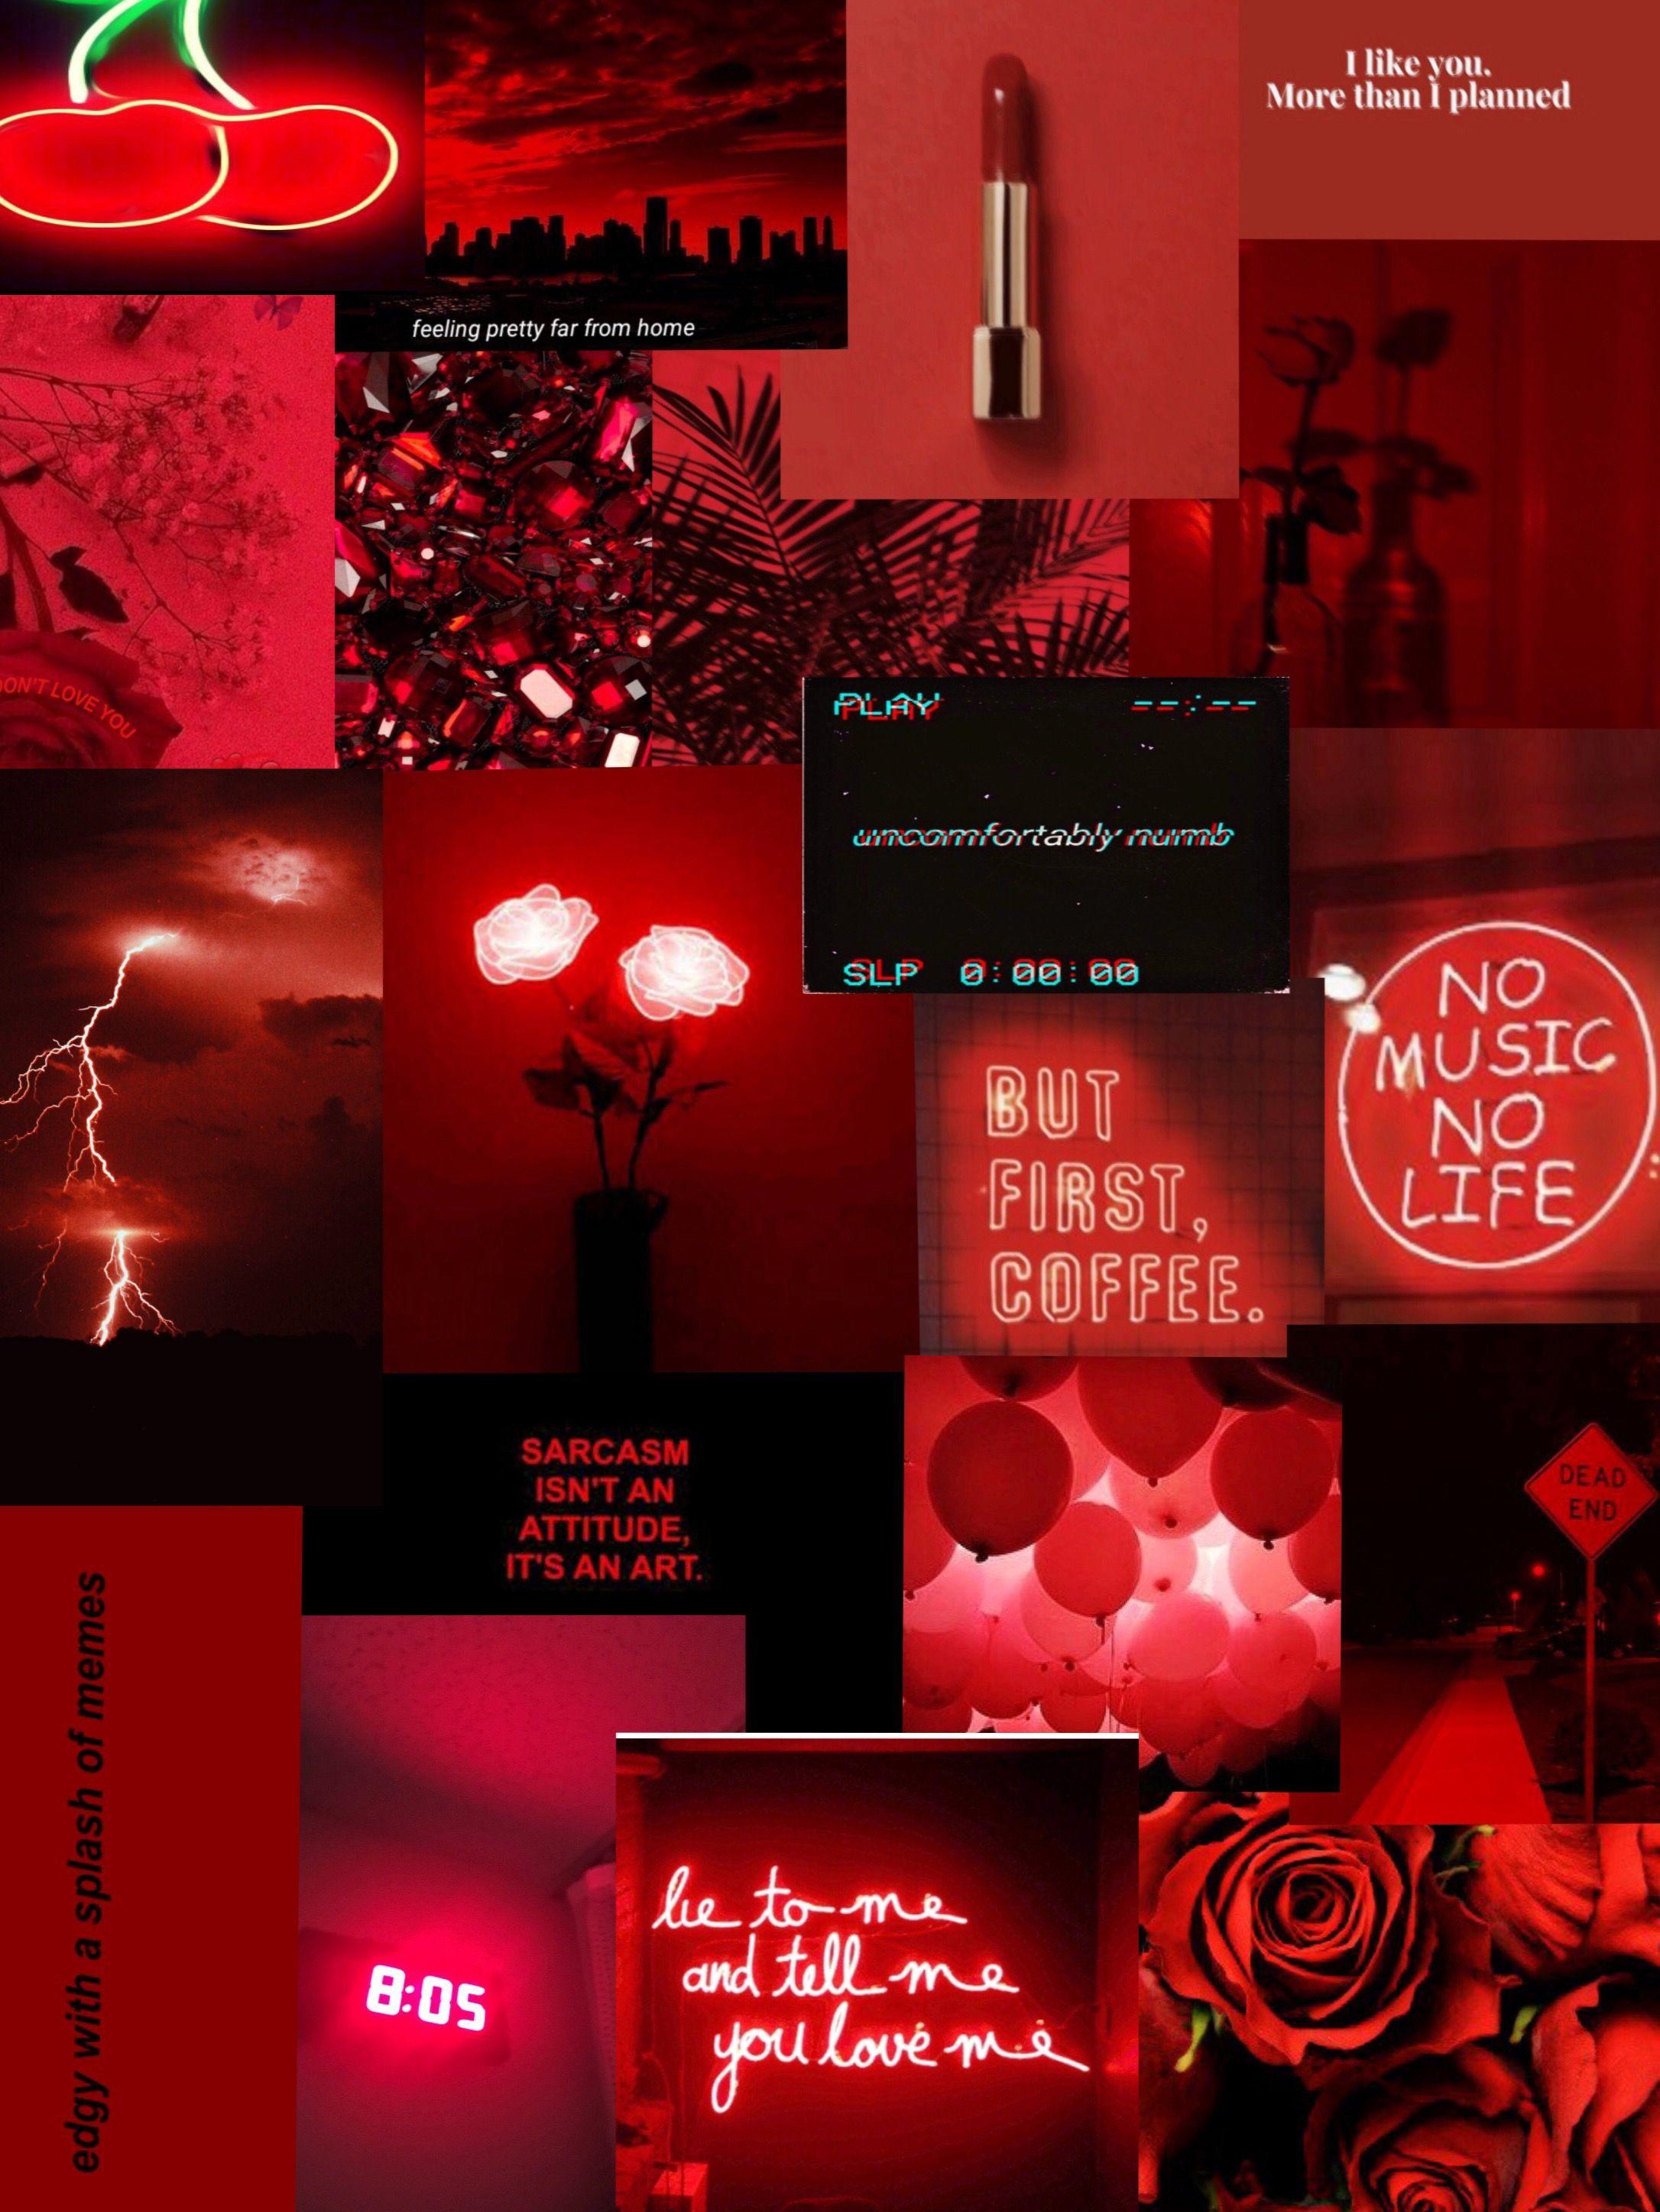 20leahmarie07 Red Aesthetic Wallpaper